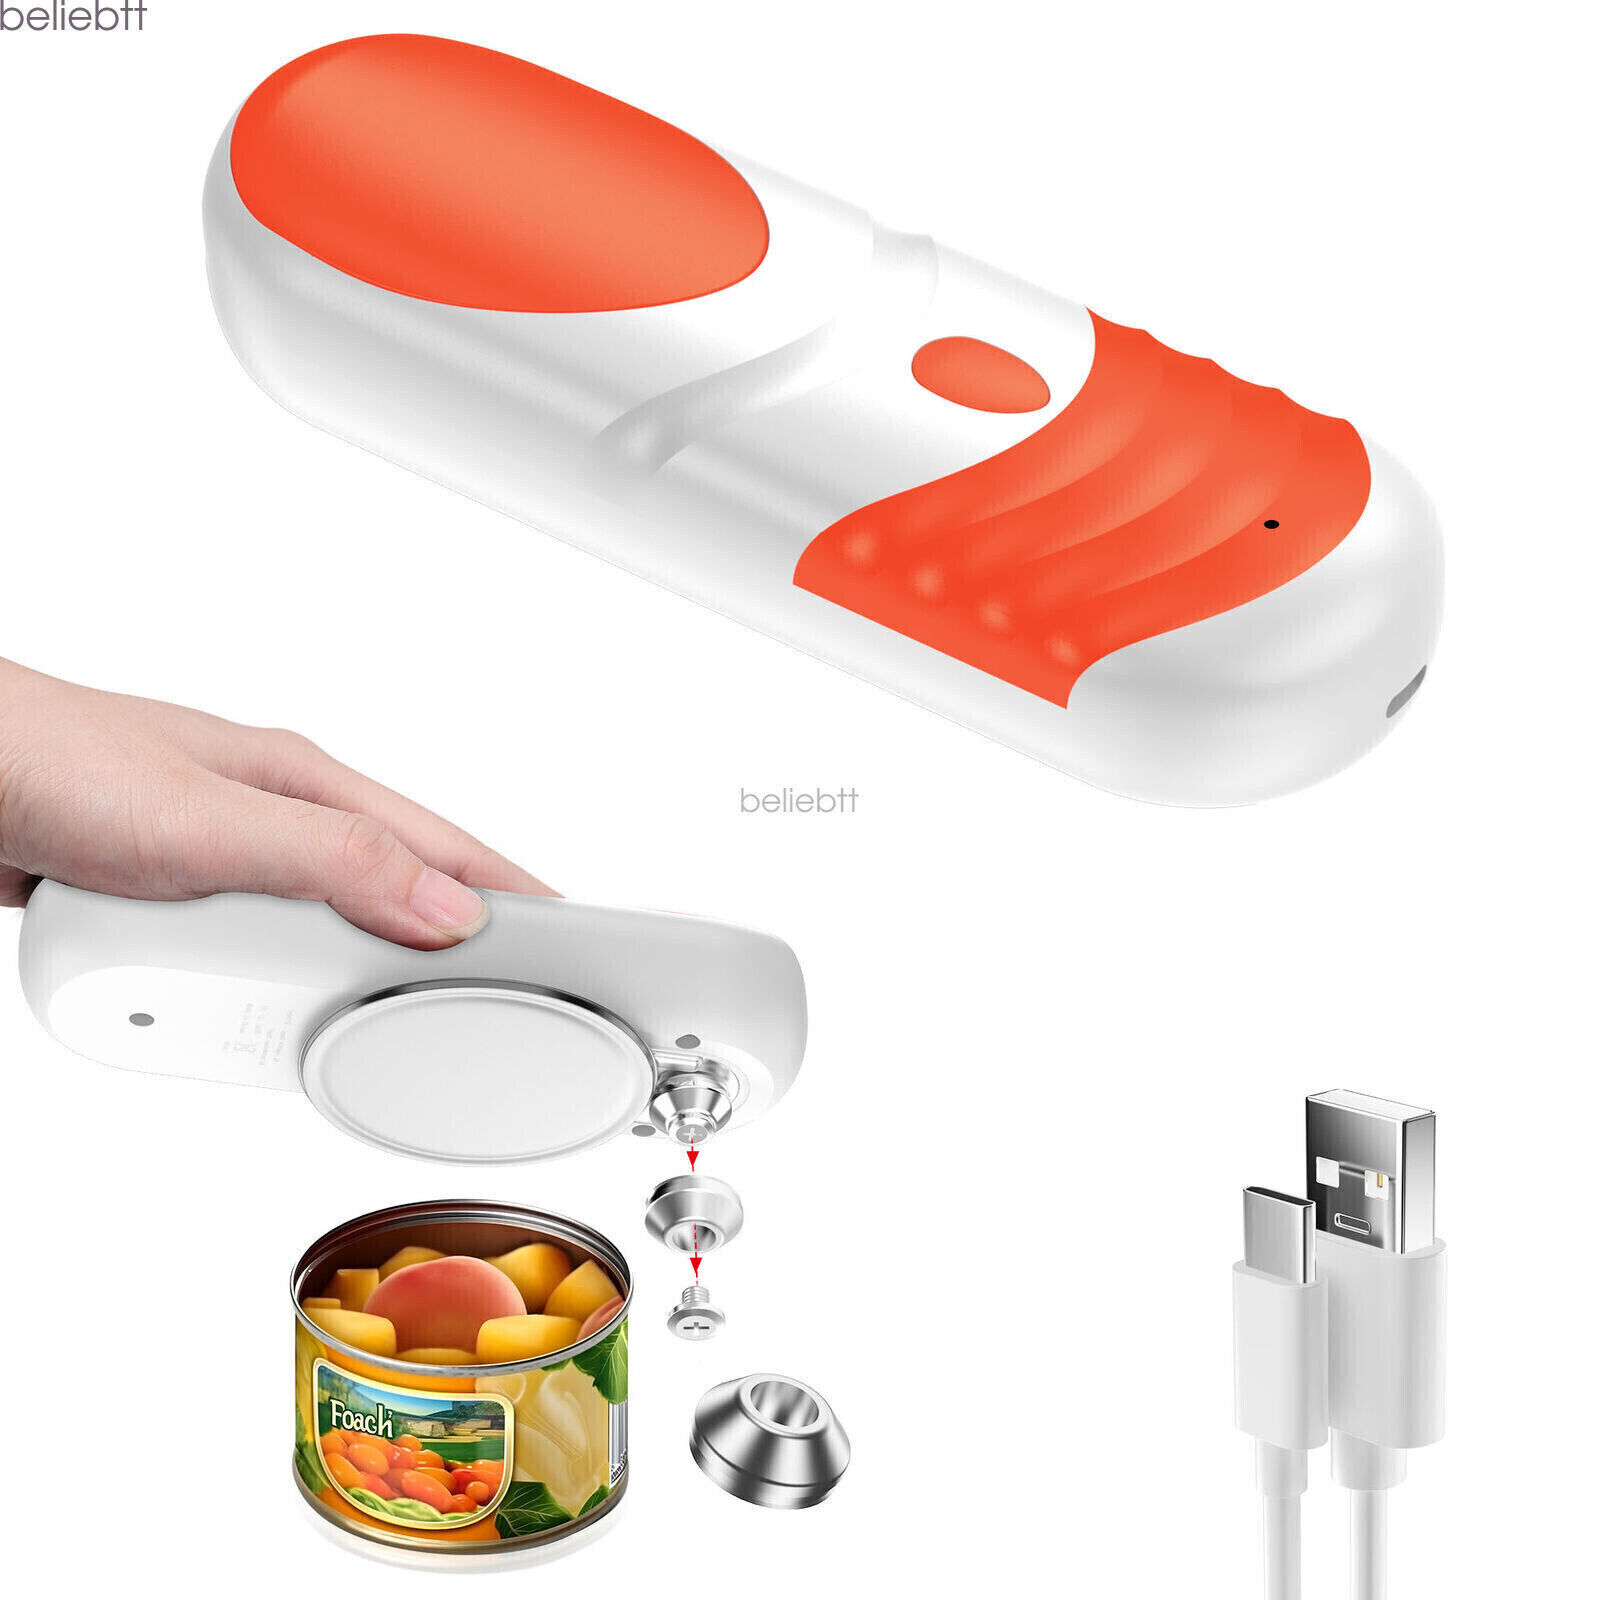 thinkstar Rechargeable Automatic Can Opener With Tilt Blade Opens Any Size Can Smooth Edge